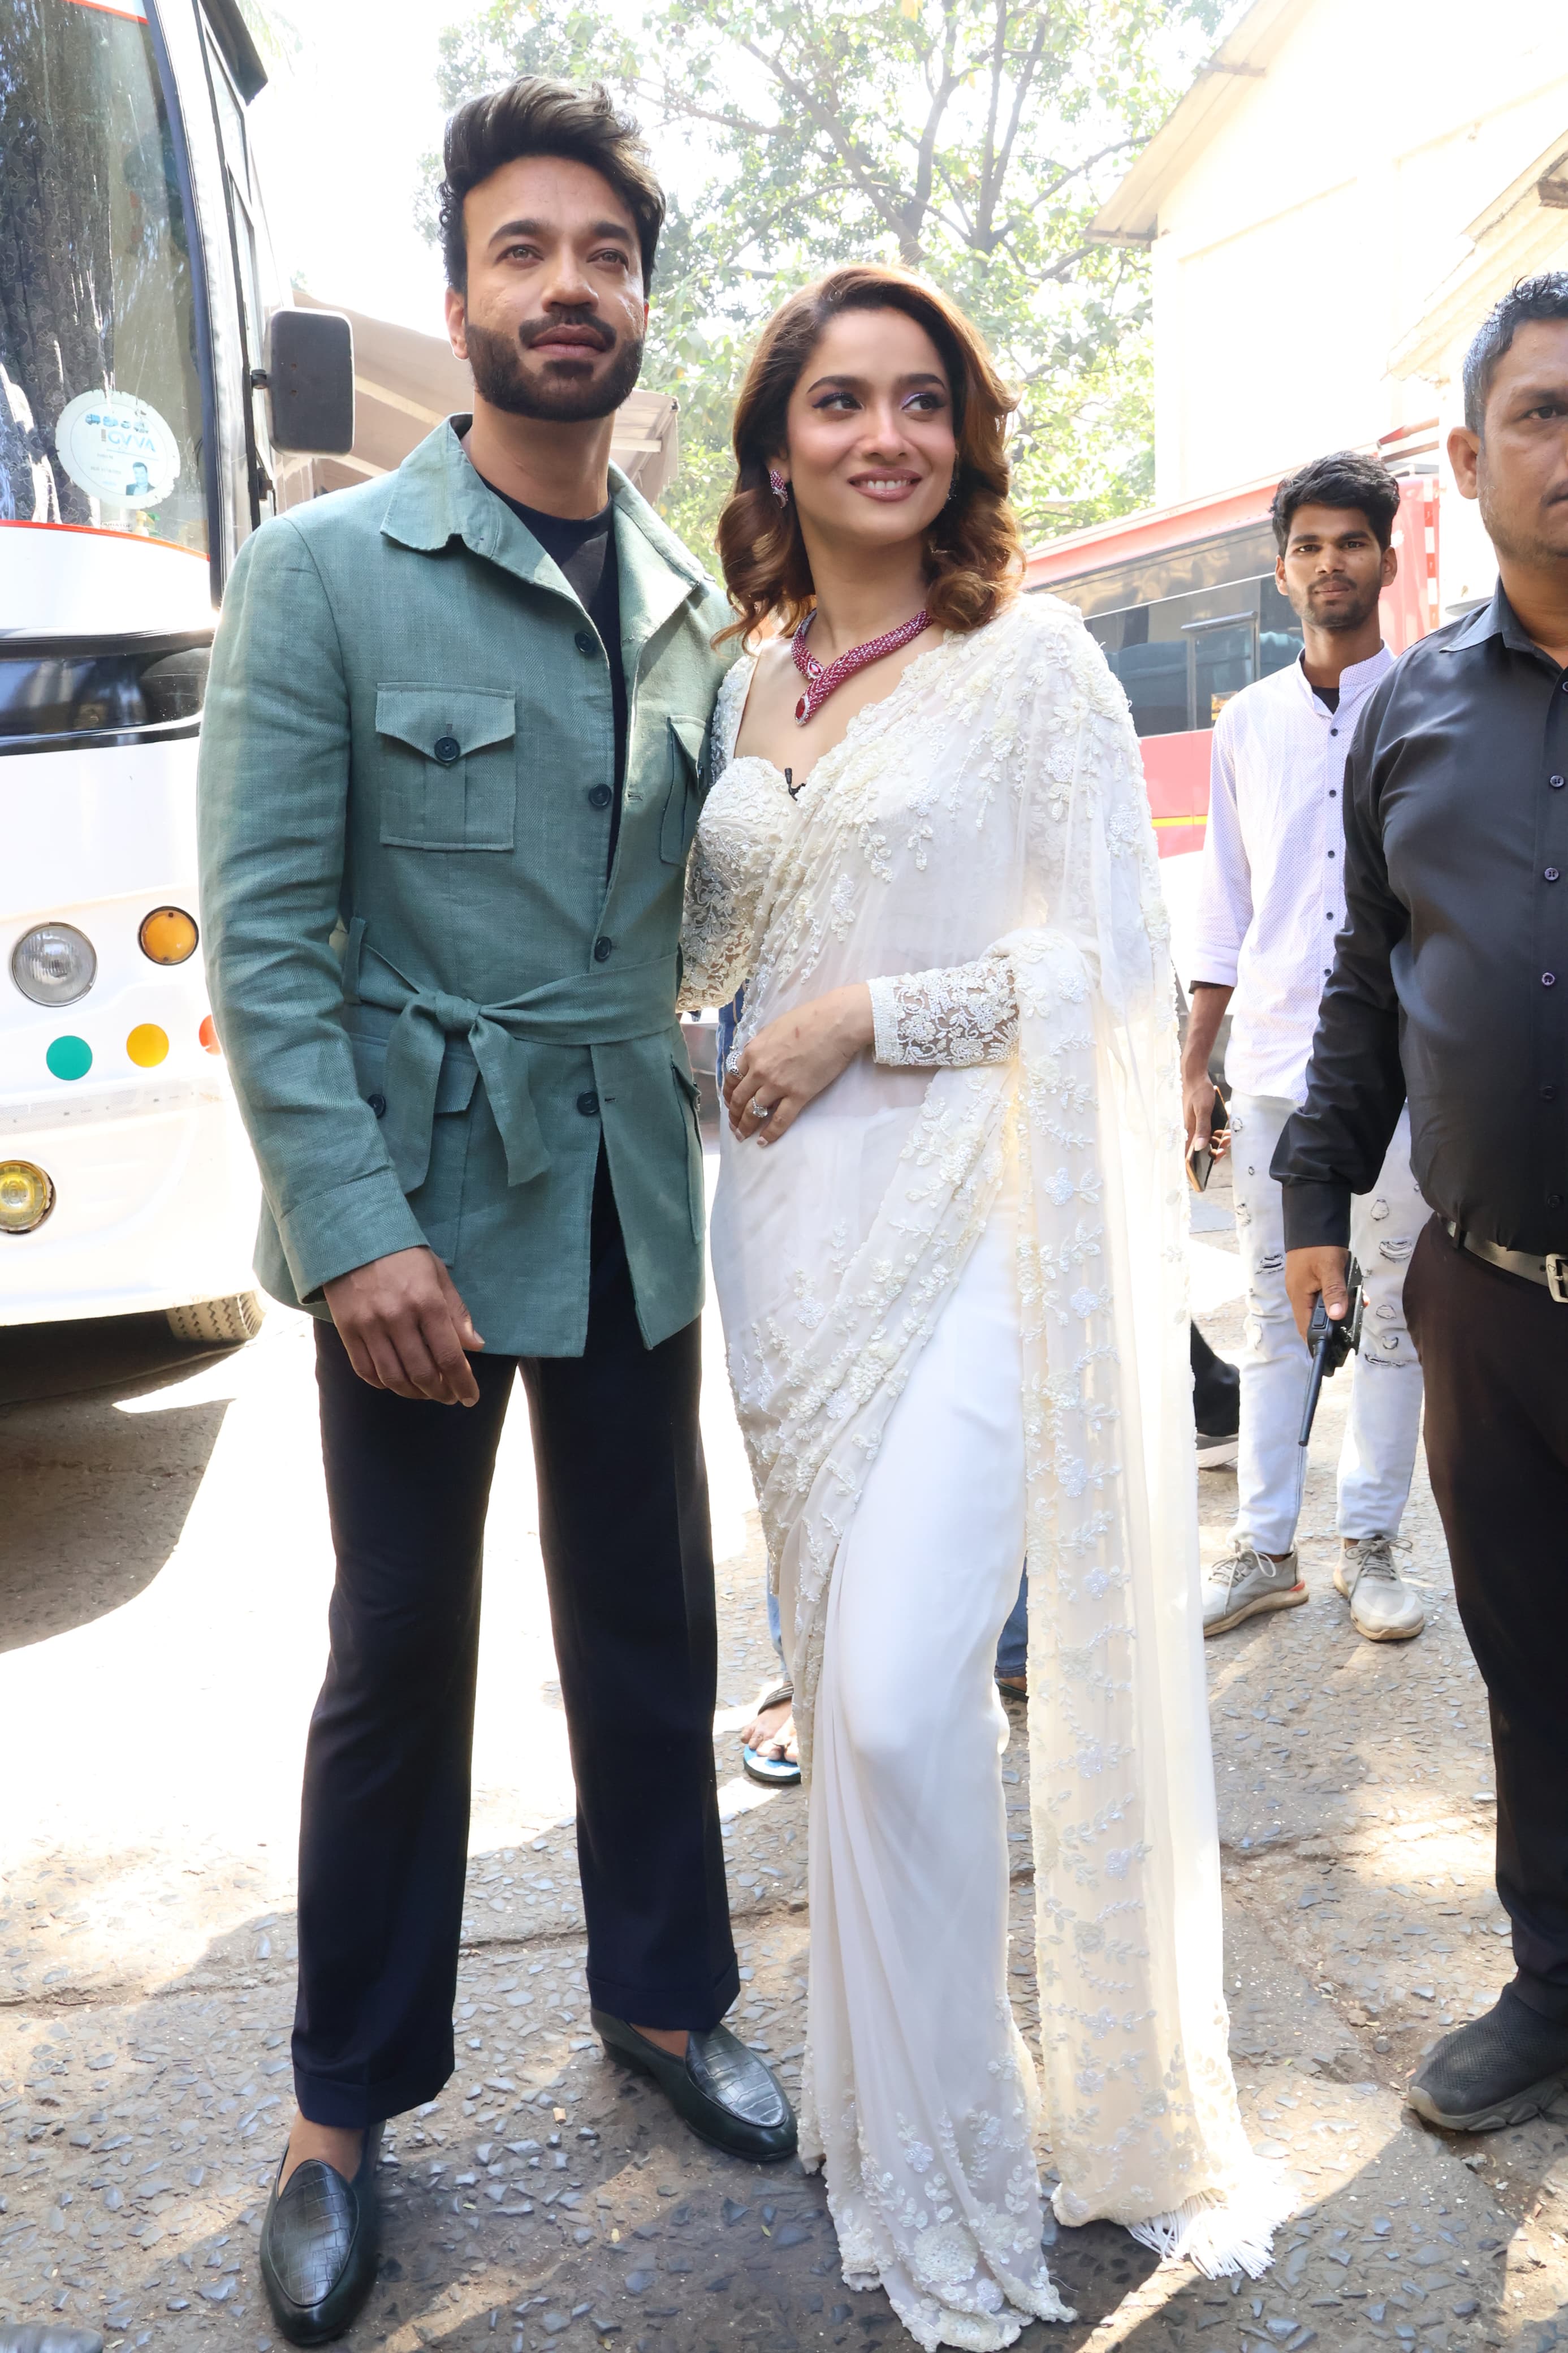 Vicky Jain and Ankita Lokhande were clicked at the sets of Dance Deewane. The two were looking incredibly smart in the pics